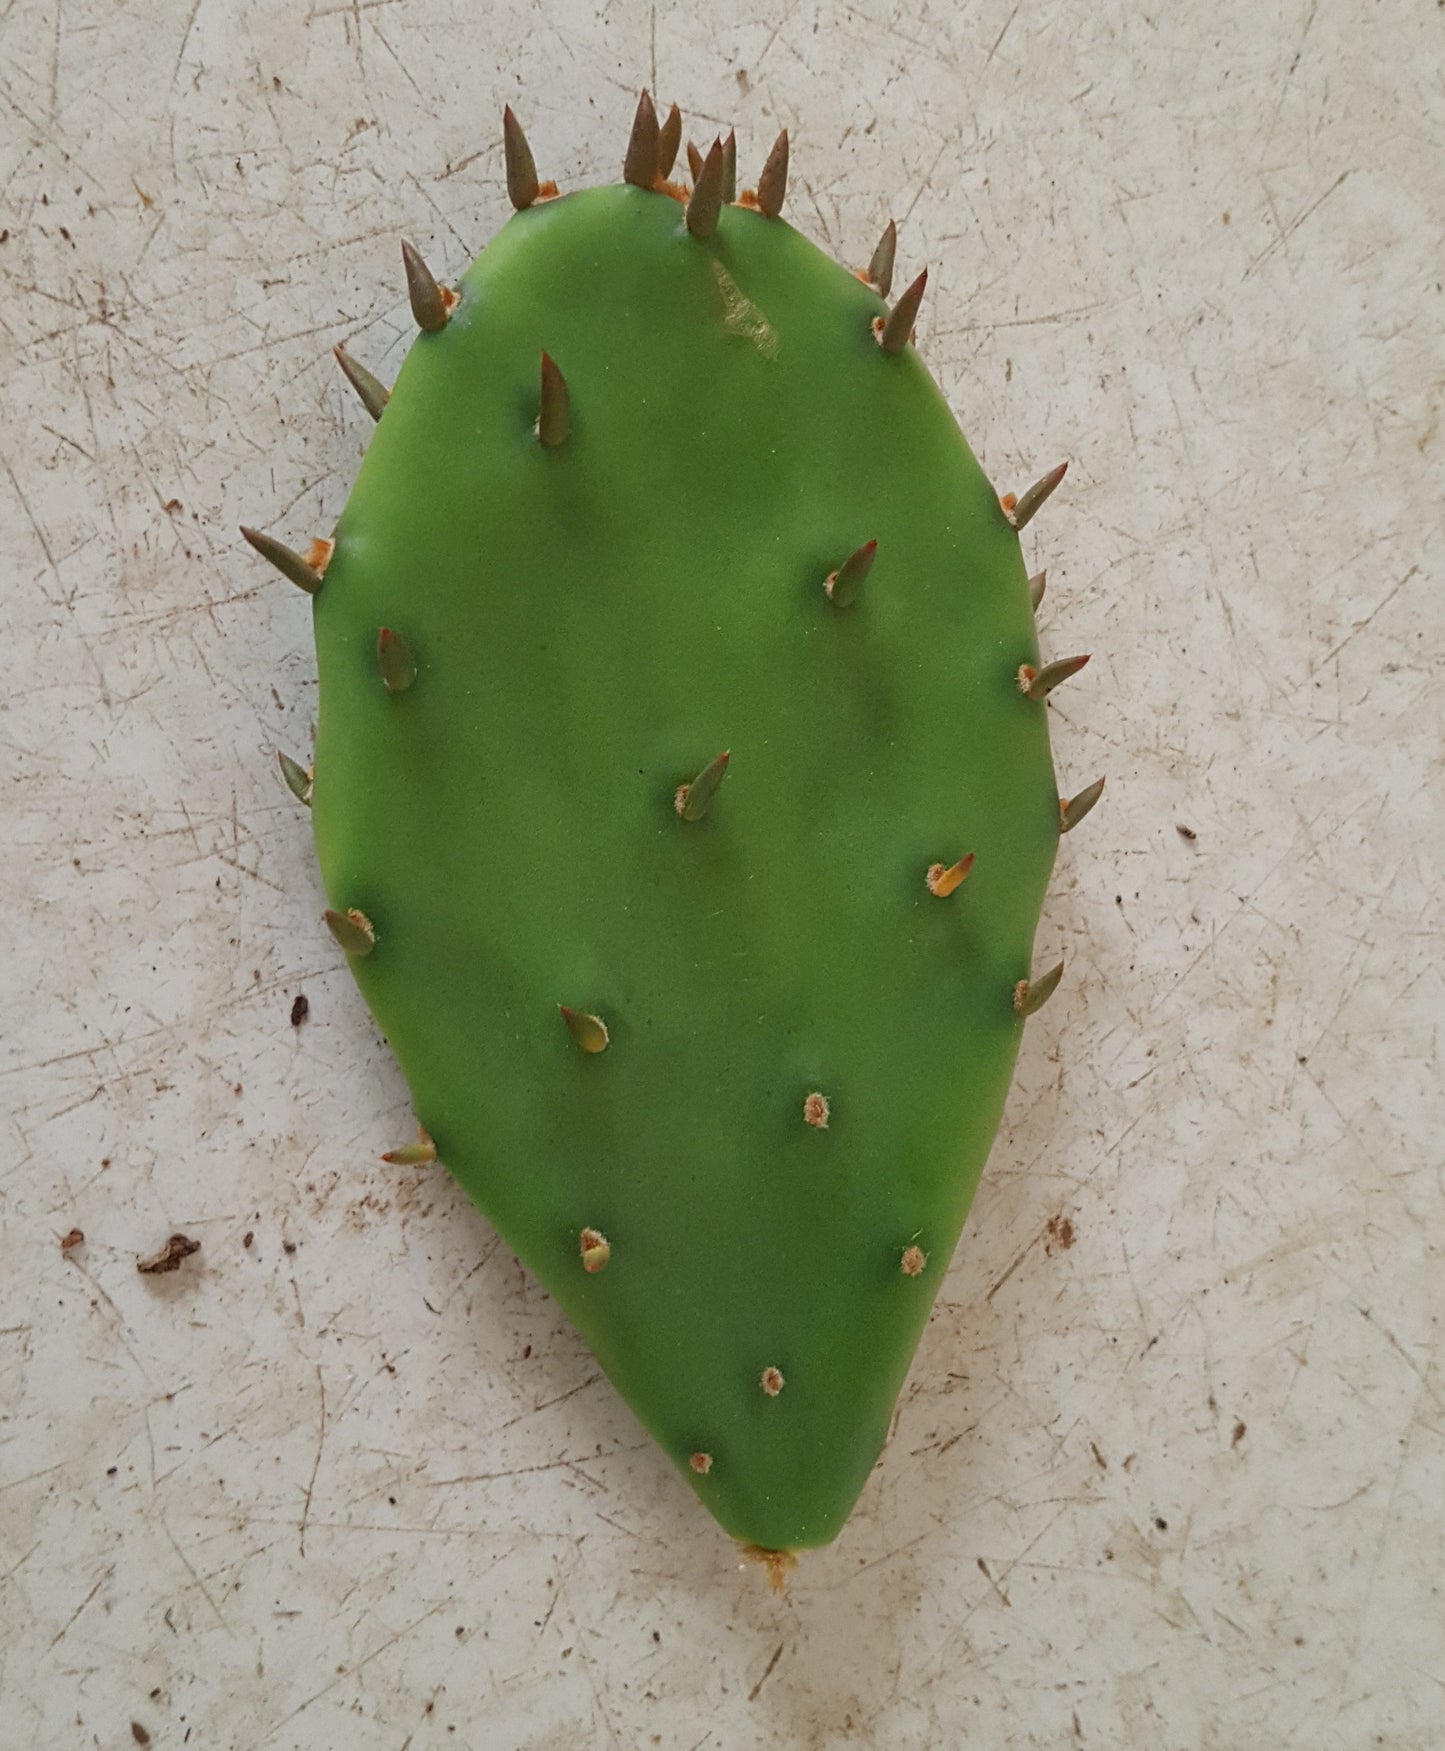 Eastern Prickly Pear Cactus Pads (Opuntia humifusa)